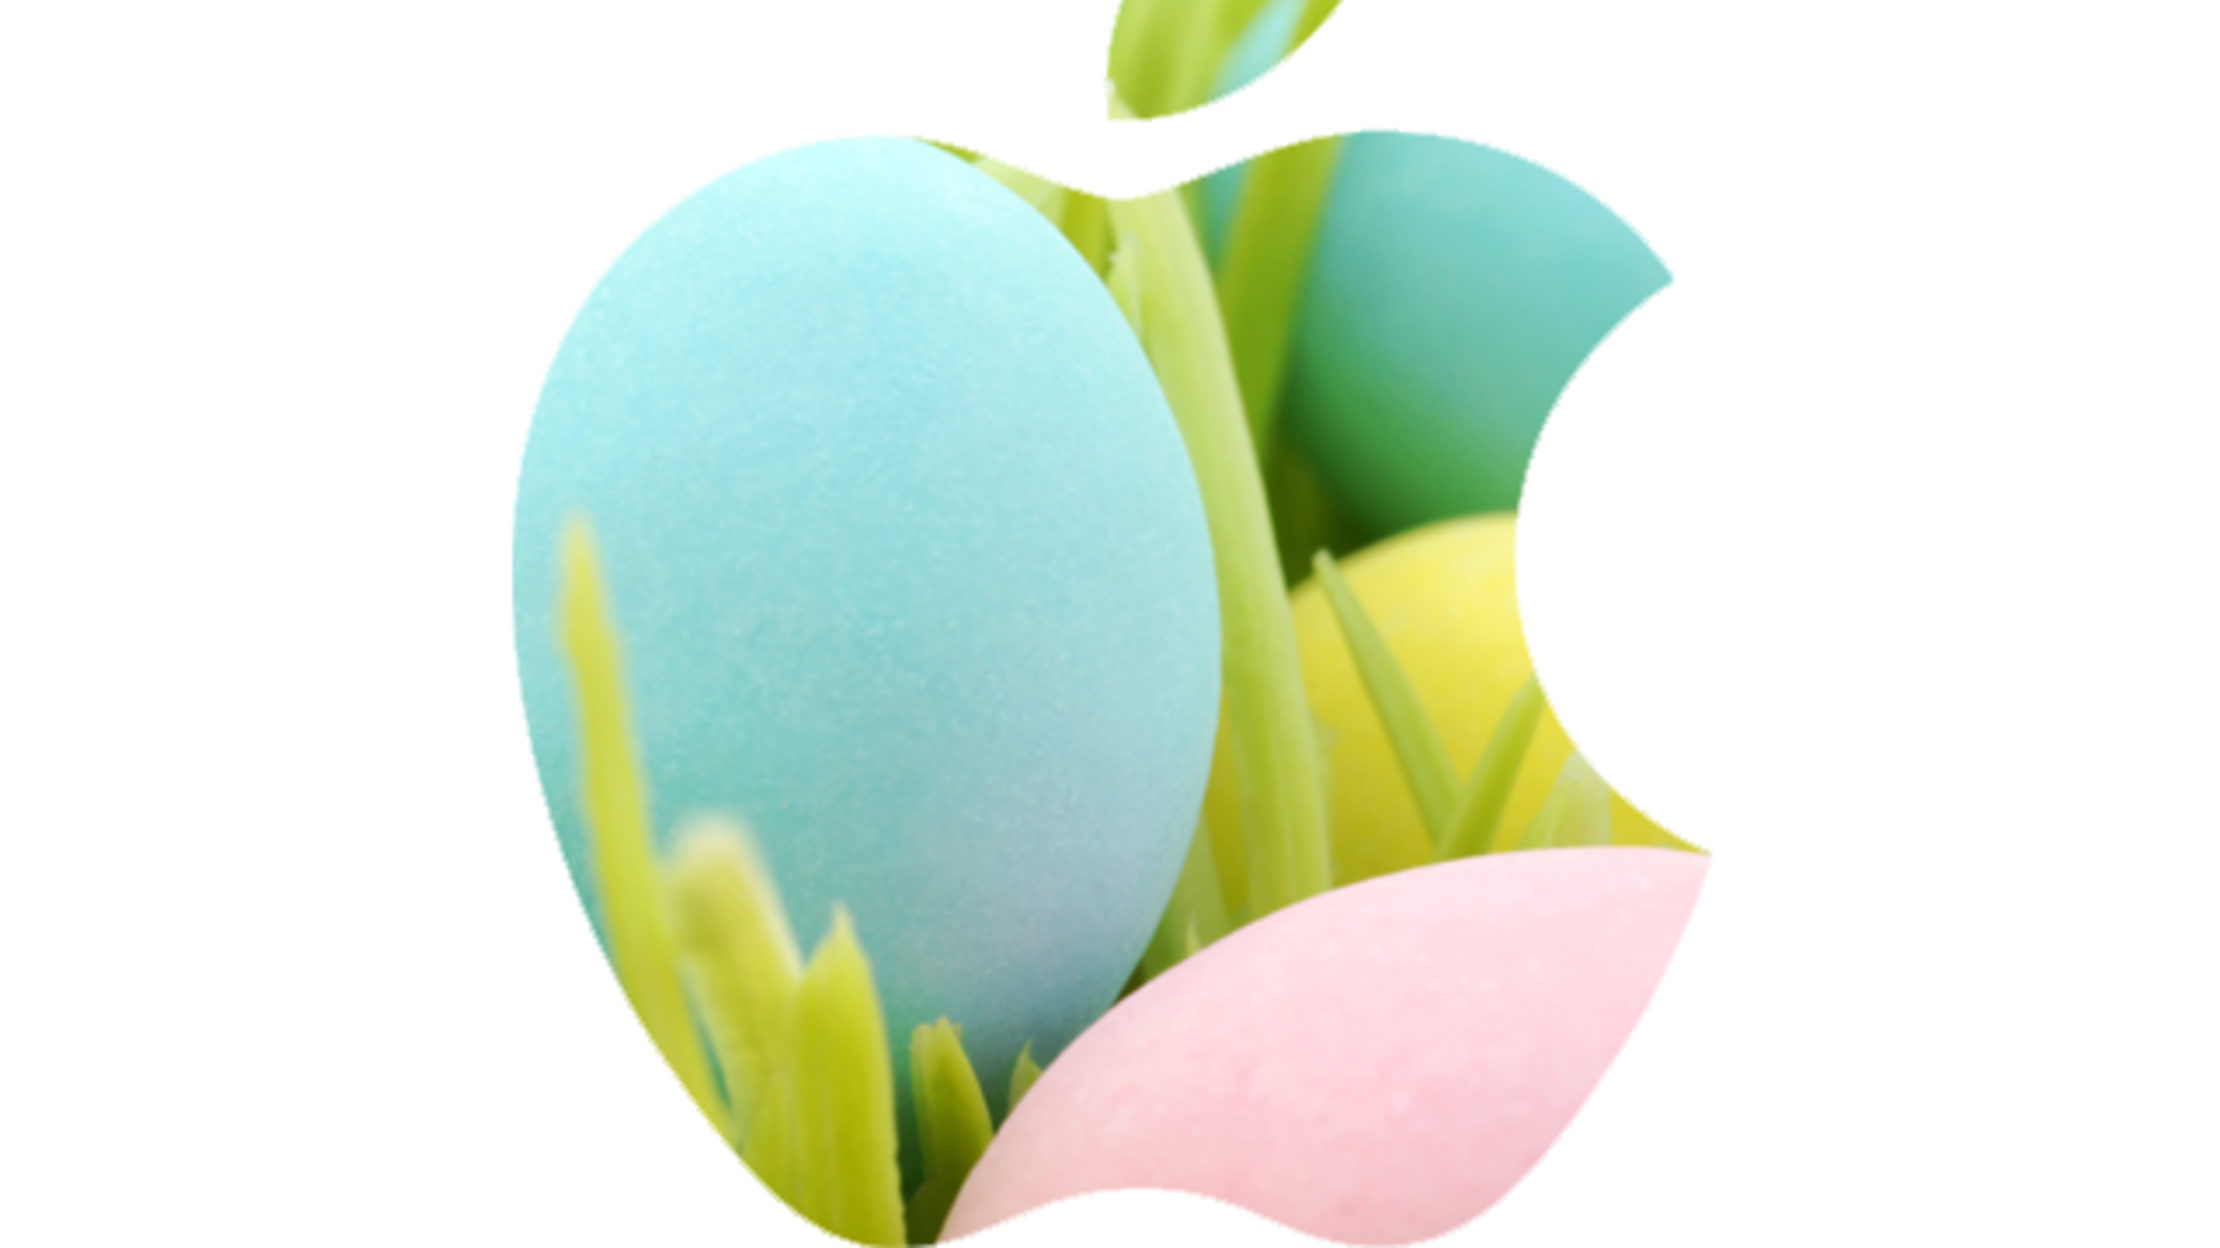 16 Easter Eggs Hidden In Apple Products Mental Floss Images, Photos, Reviews